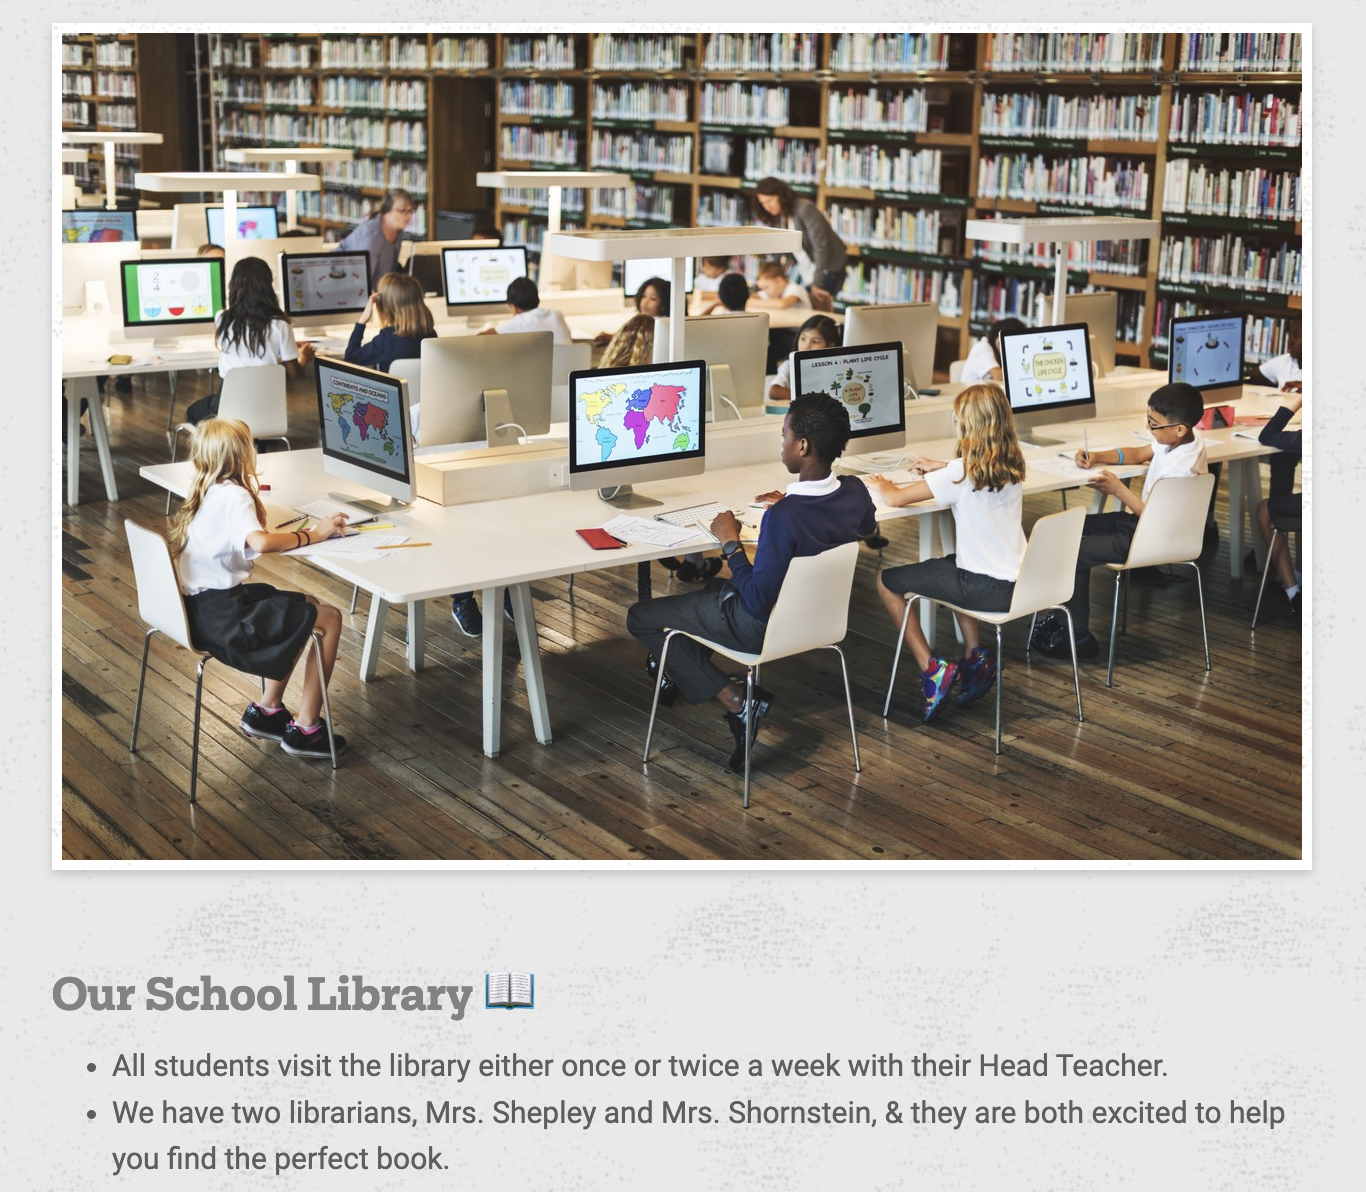 Picture of students at computer stations in the school library